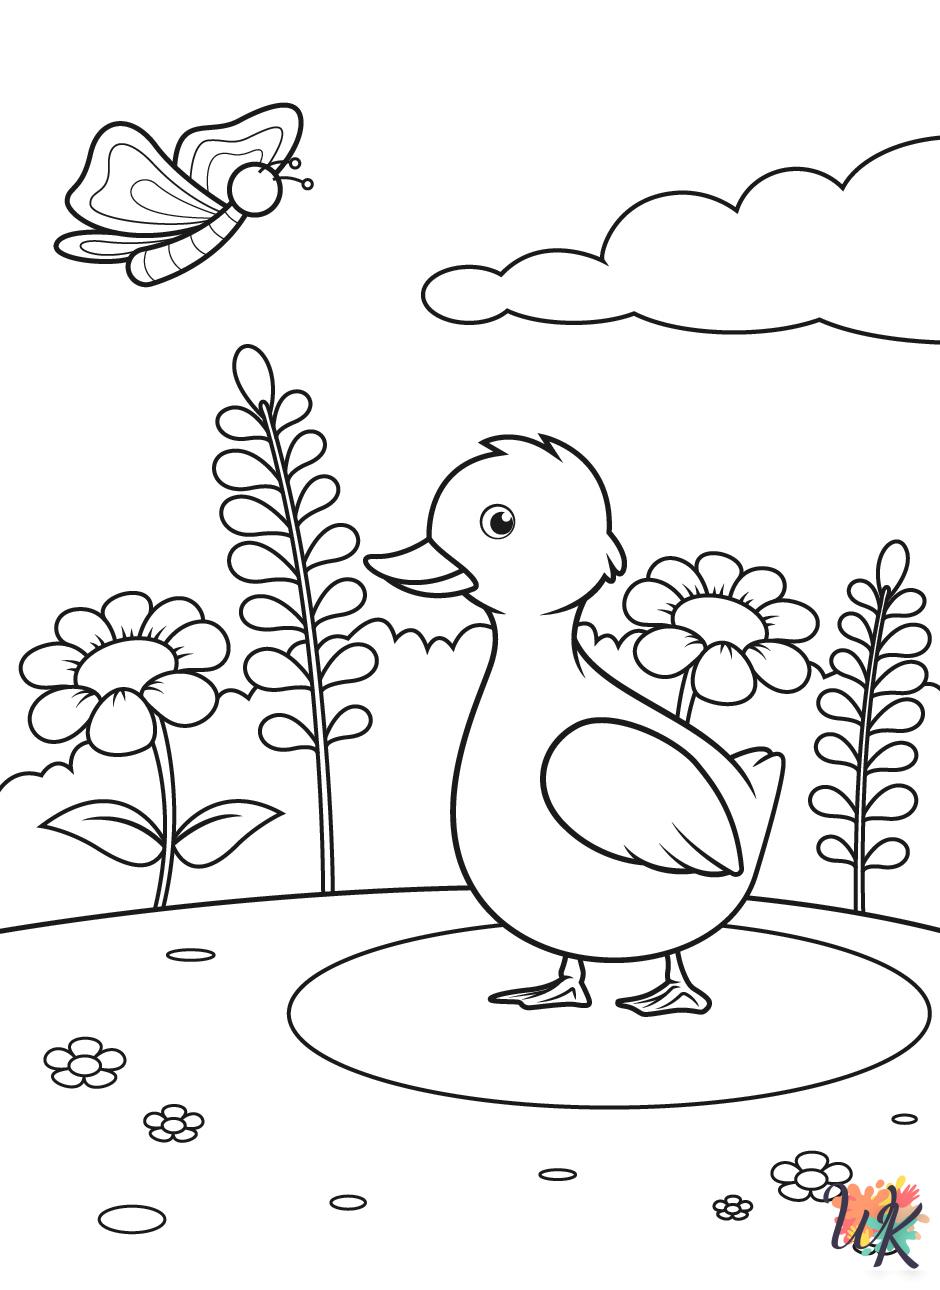 Ducks coloring pages grinch